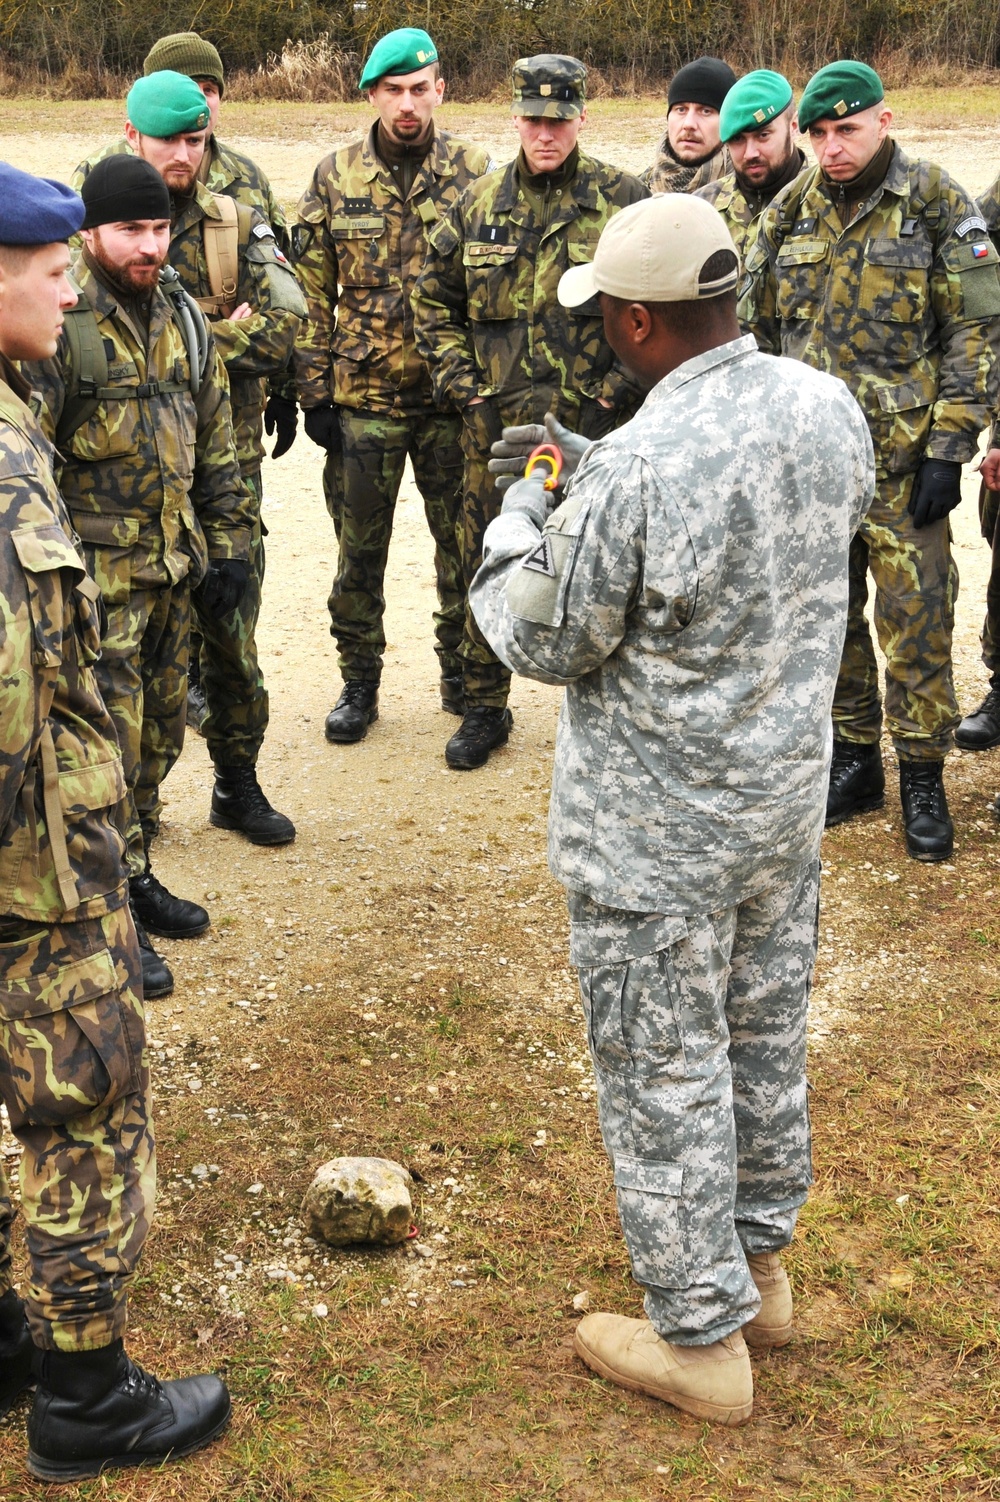 Multinational training at the Joint Multinational Readiness Center in Germany